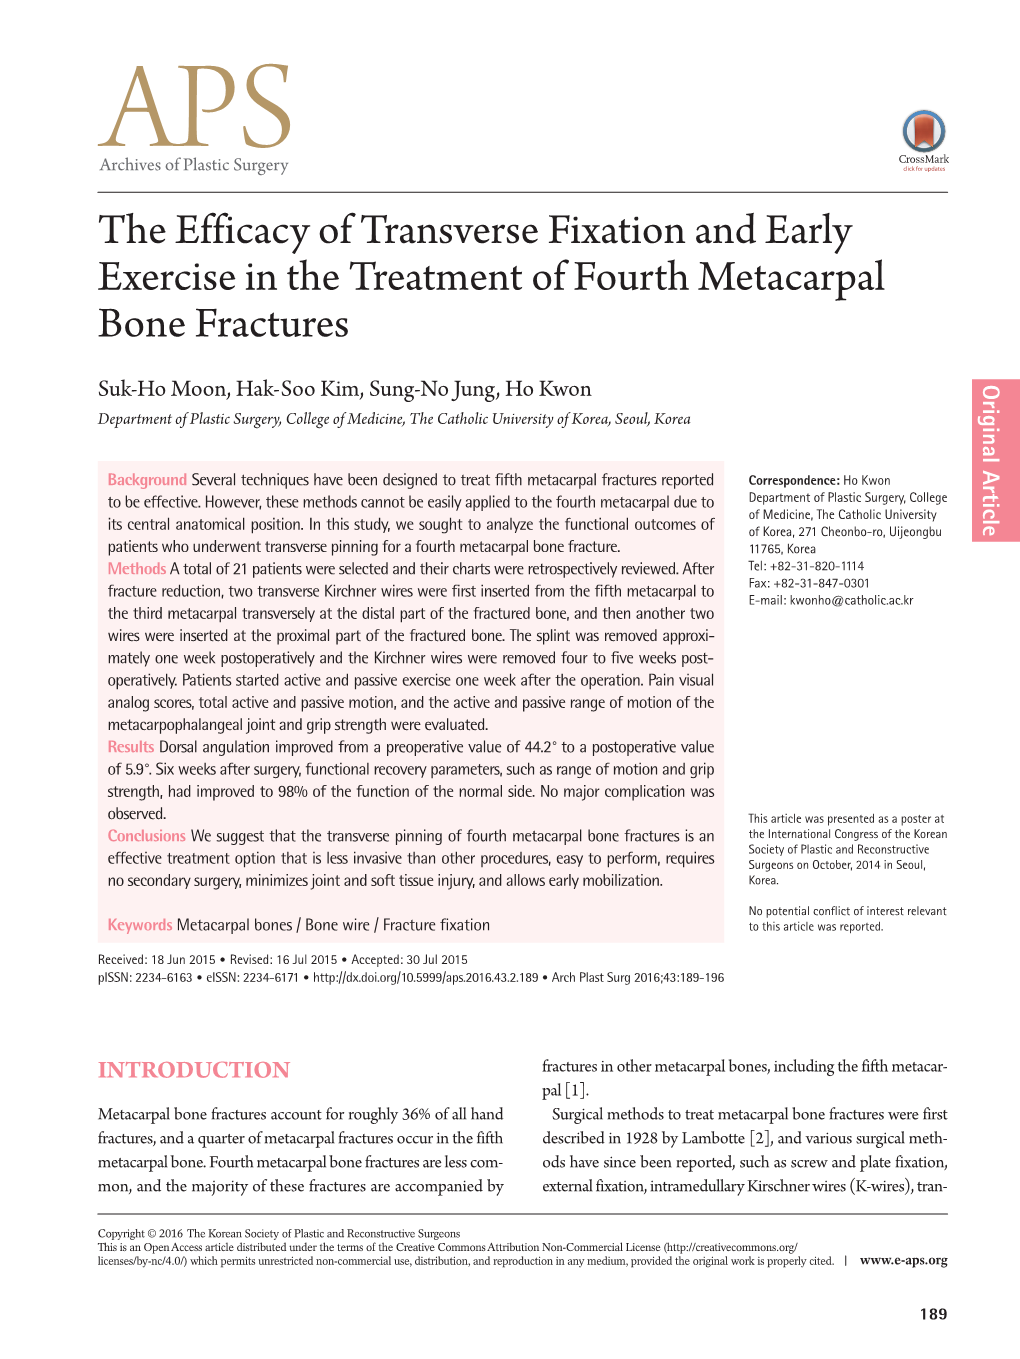 The Efficacy of Transverse Fixation and Early Exercise in the Treatment of Fourth Metacarpal Bone Fractures